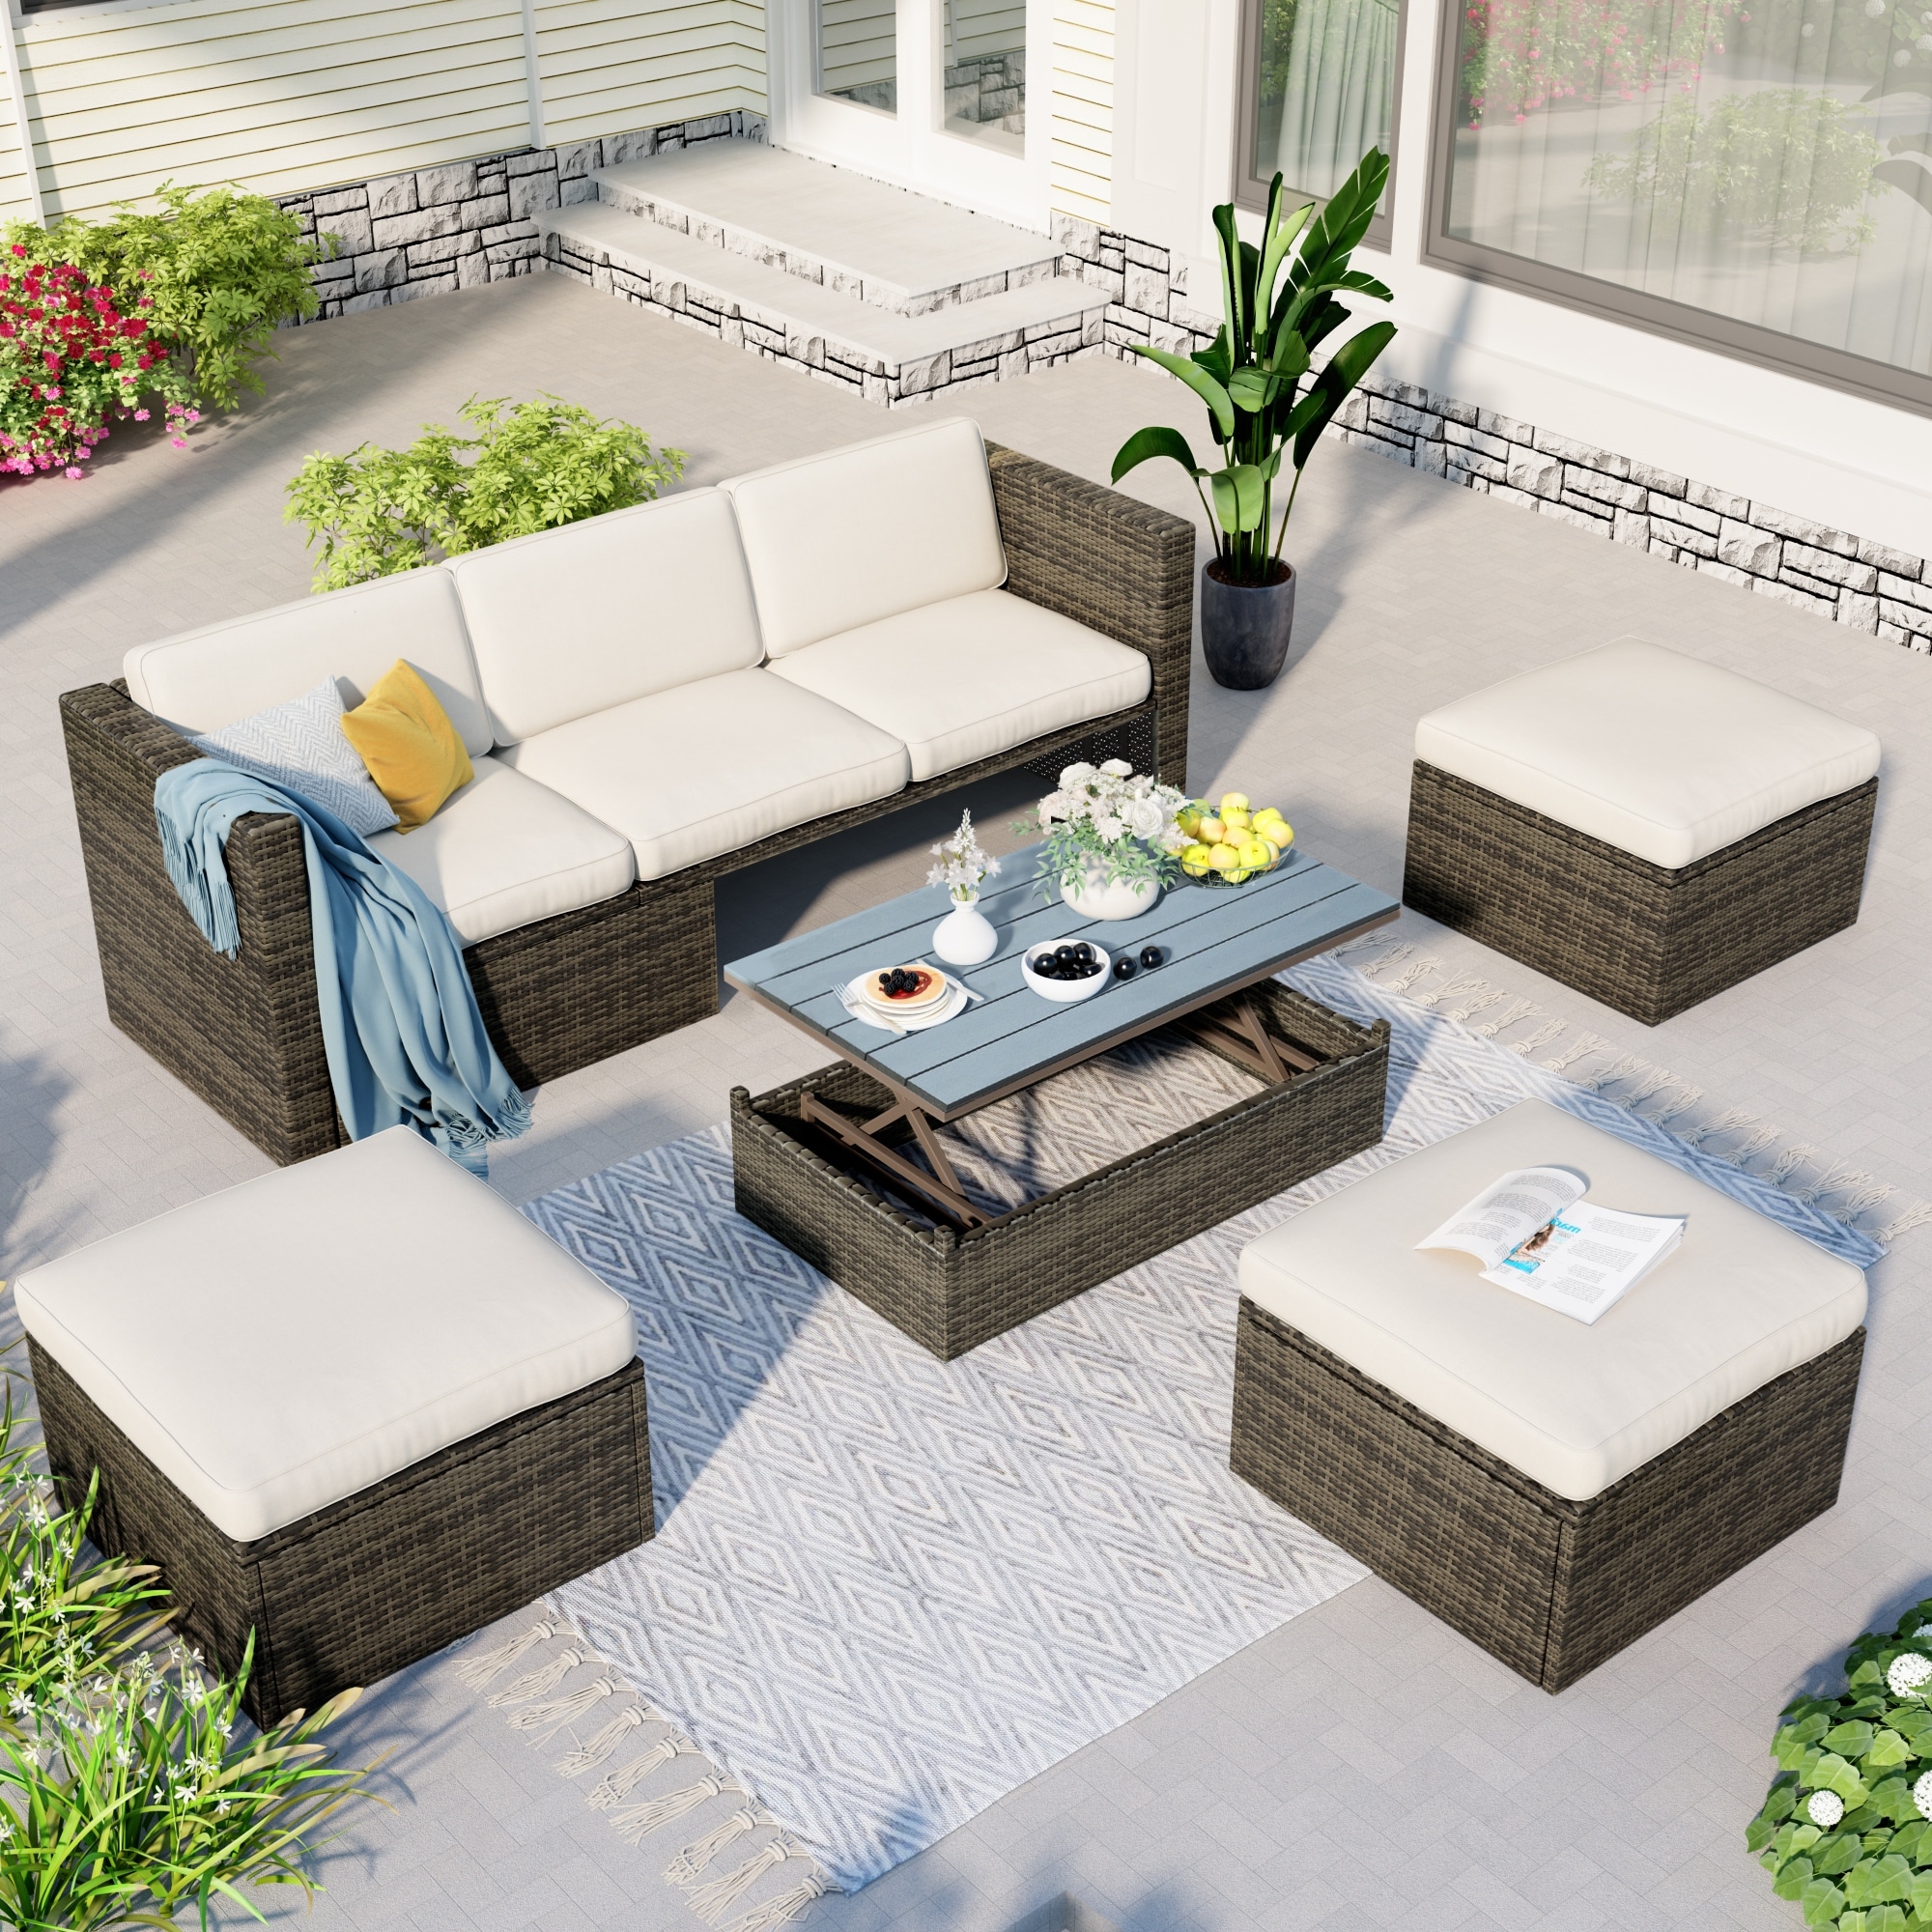 5-piece Patio Wicker Sofa With Ottomans And Lift Top Coffee Table